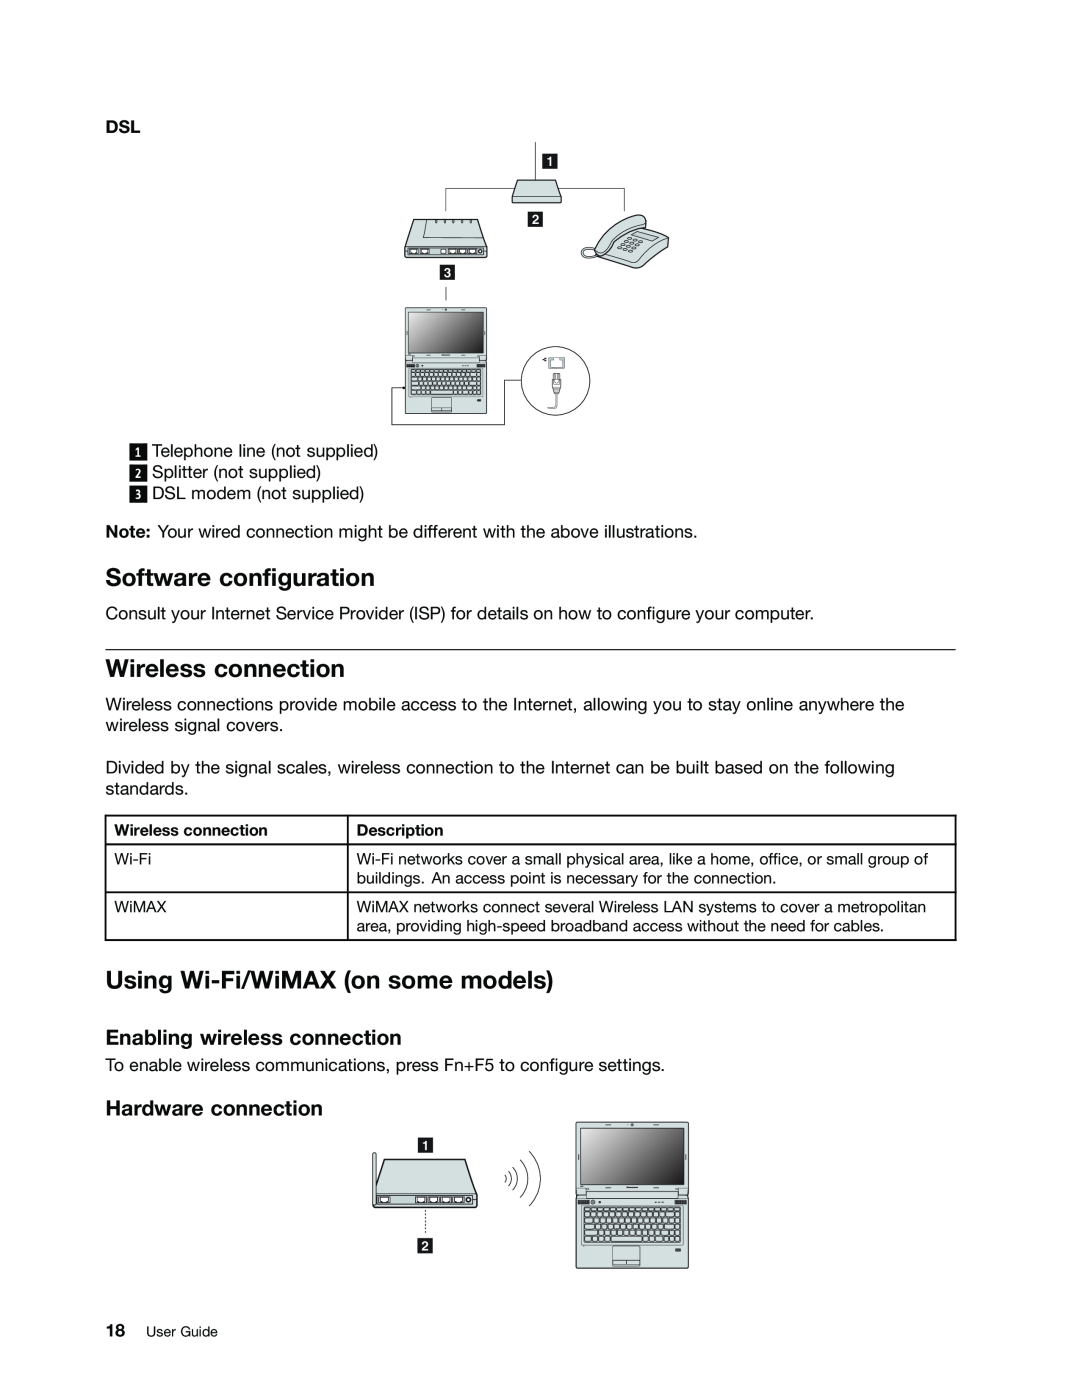 Lenovo B470E Software configuration, Wireless connection, Using Wi-Fi/WiMAX on some models, Enabling wireless connection 